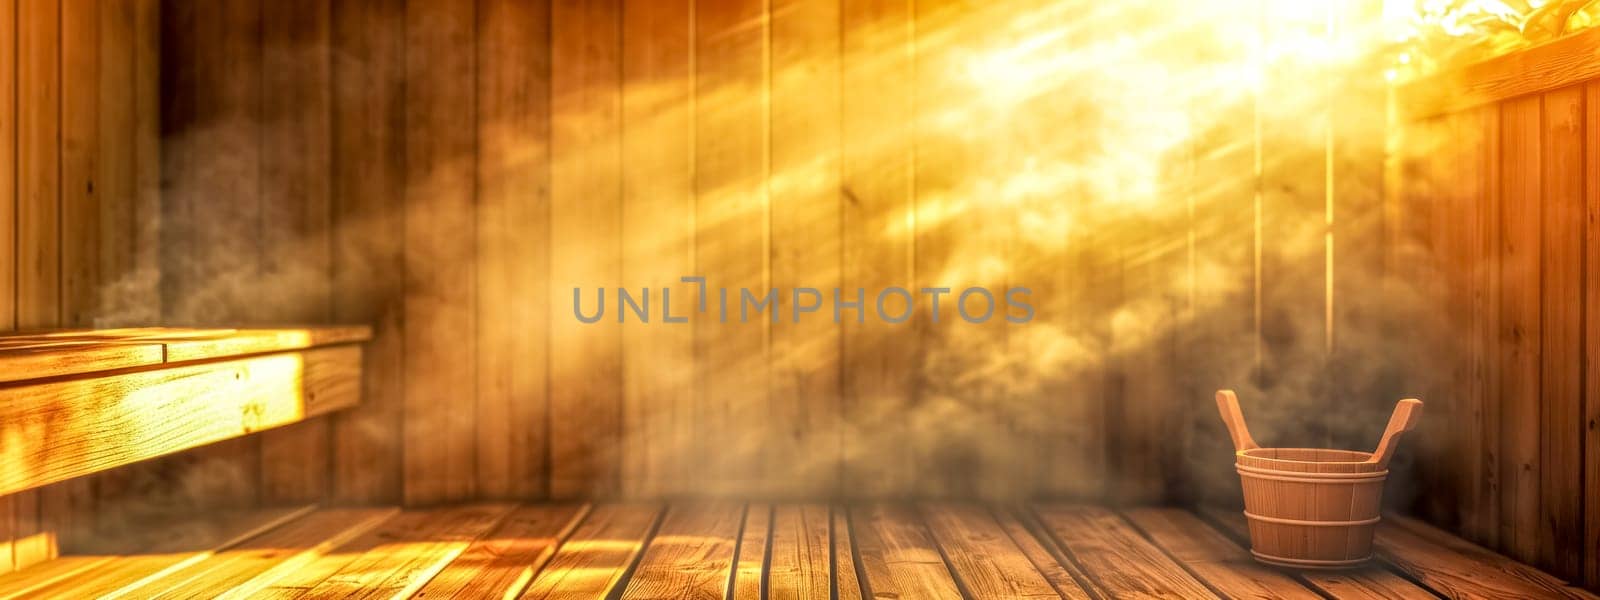 warm, inviting atmosphere of a sauna with rays of sunlight filtering through the steam, wooden interior and a traditional sauna bucket in the foreground, evoking relaxation and well-being, copy space by Edophoto